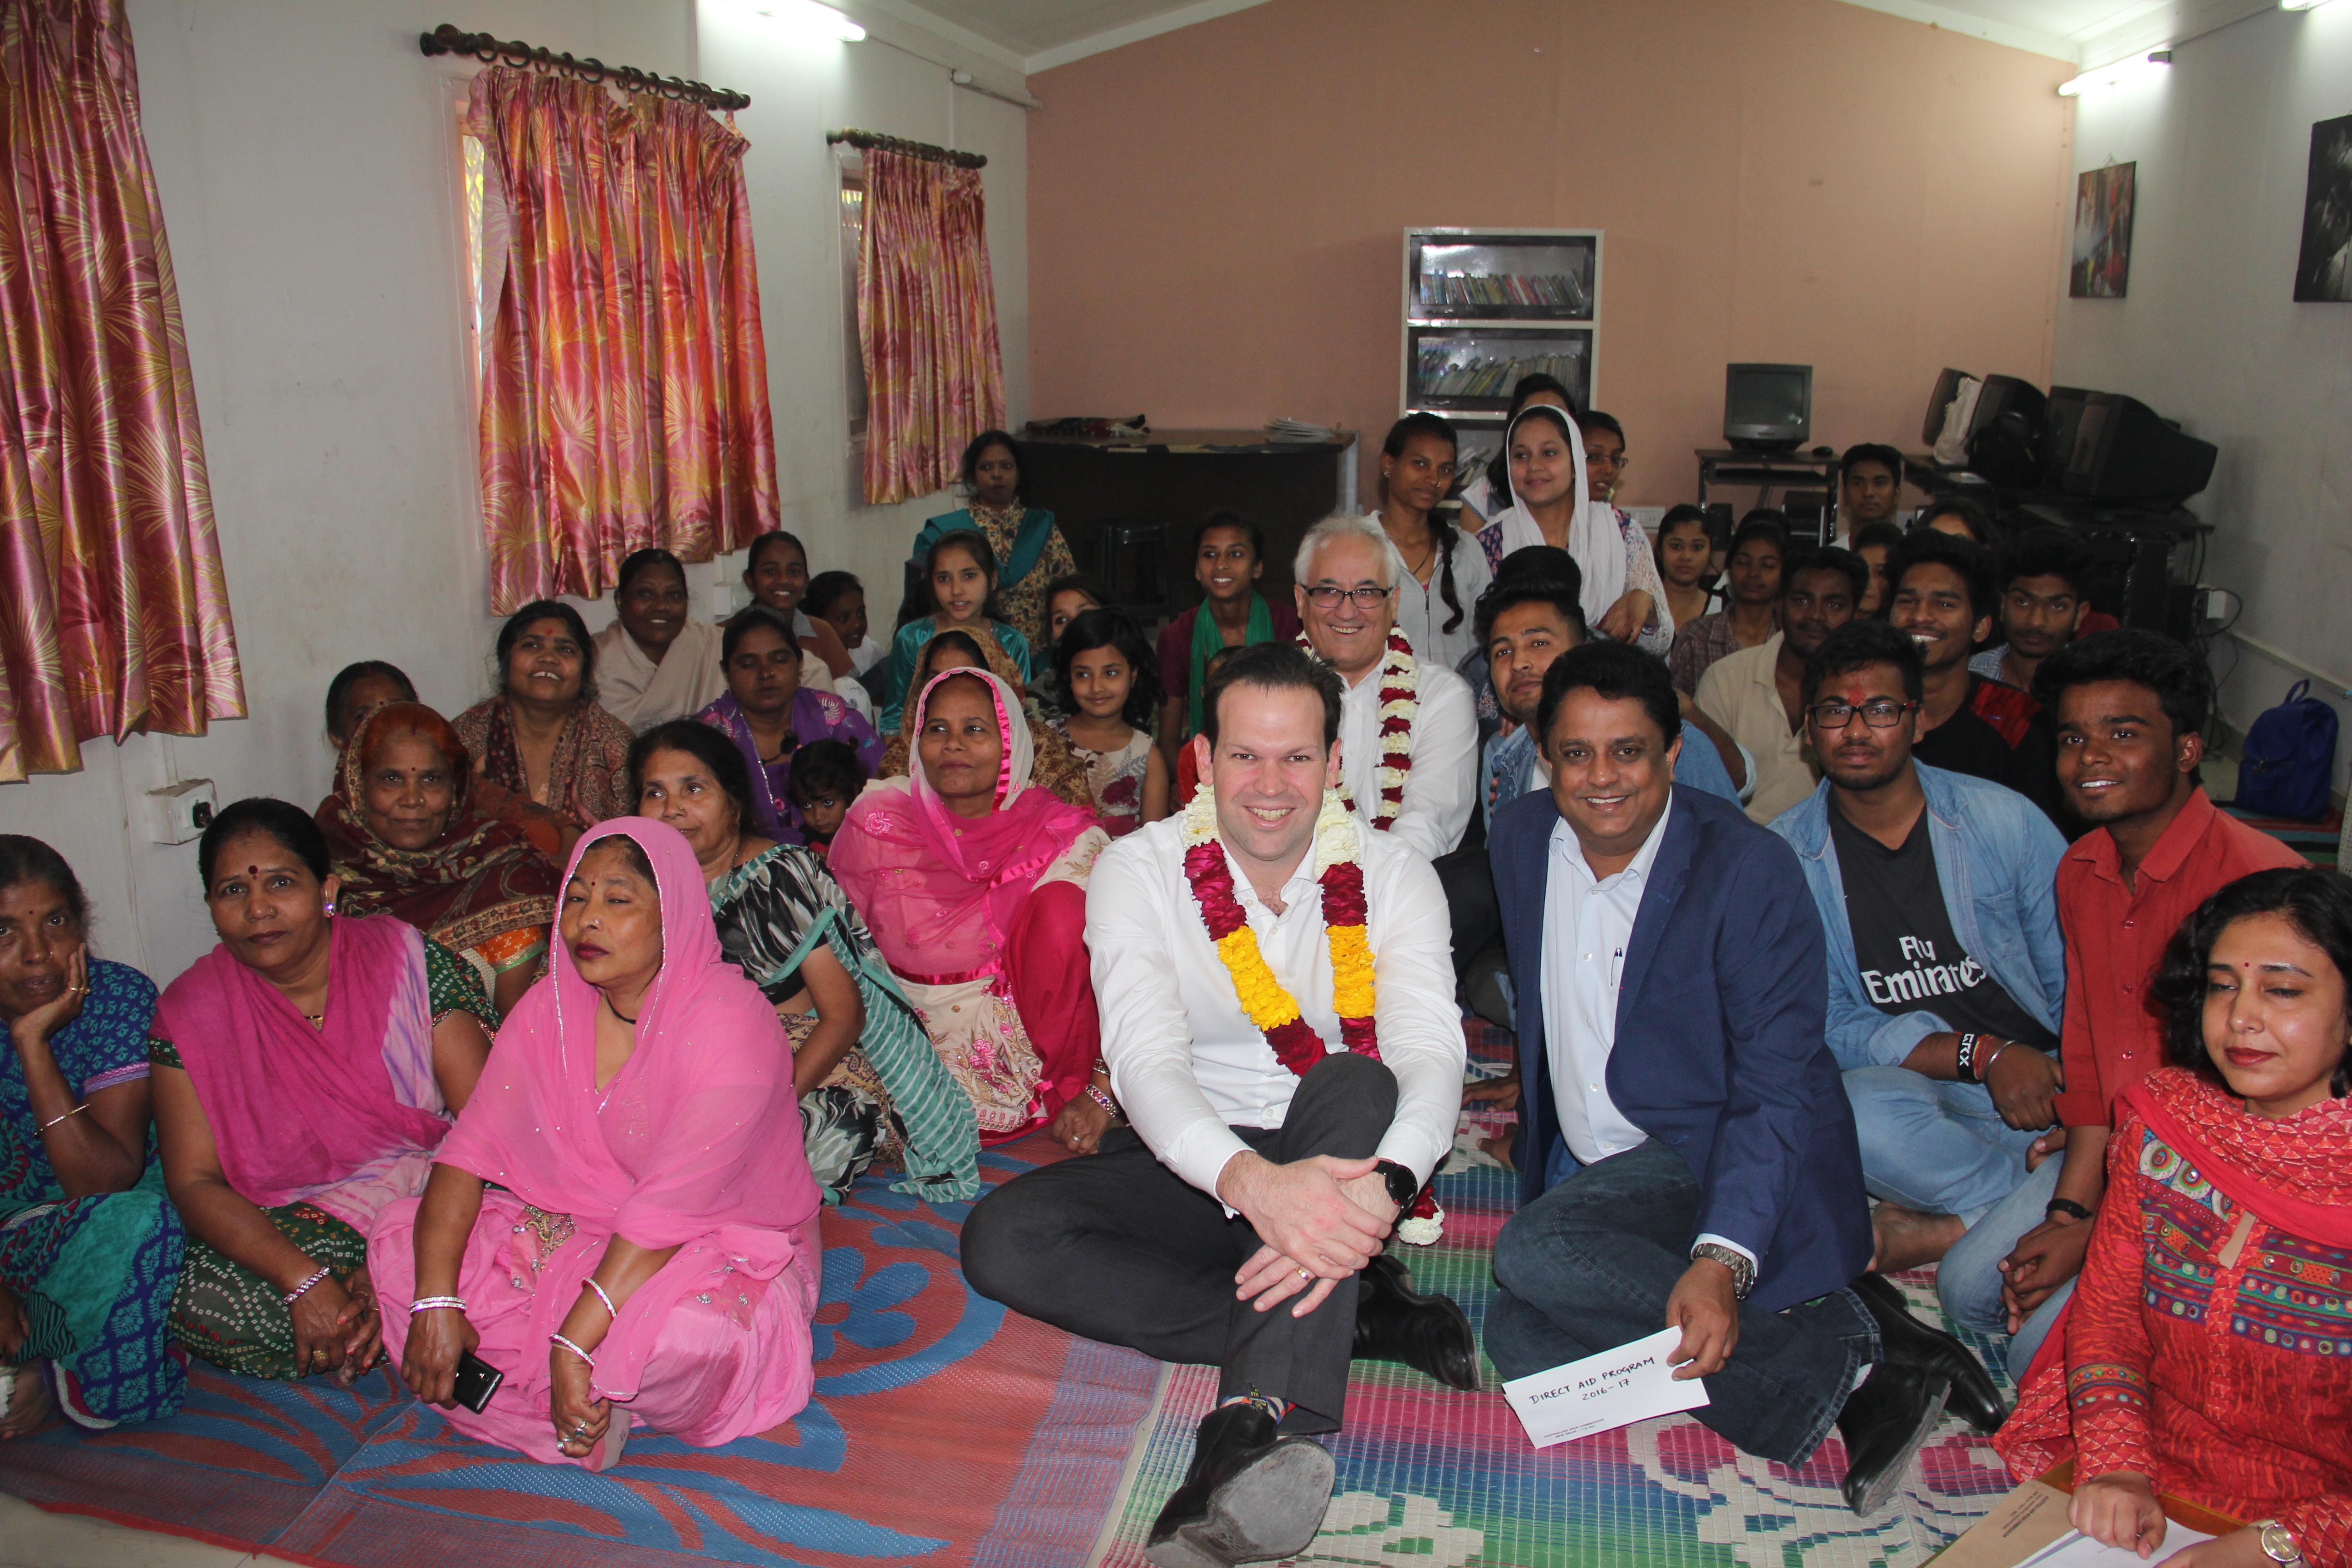 Mathew Canavan and Freddy Martin pose for a group picture with the Asha community